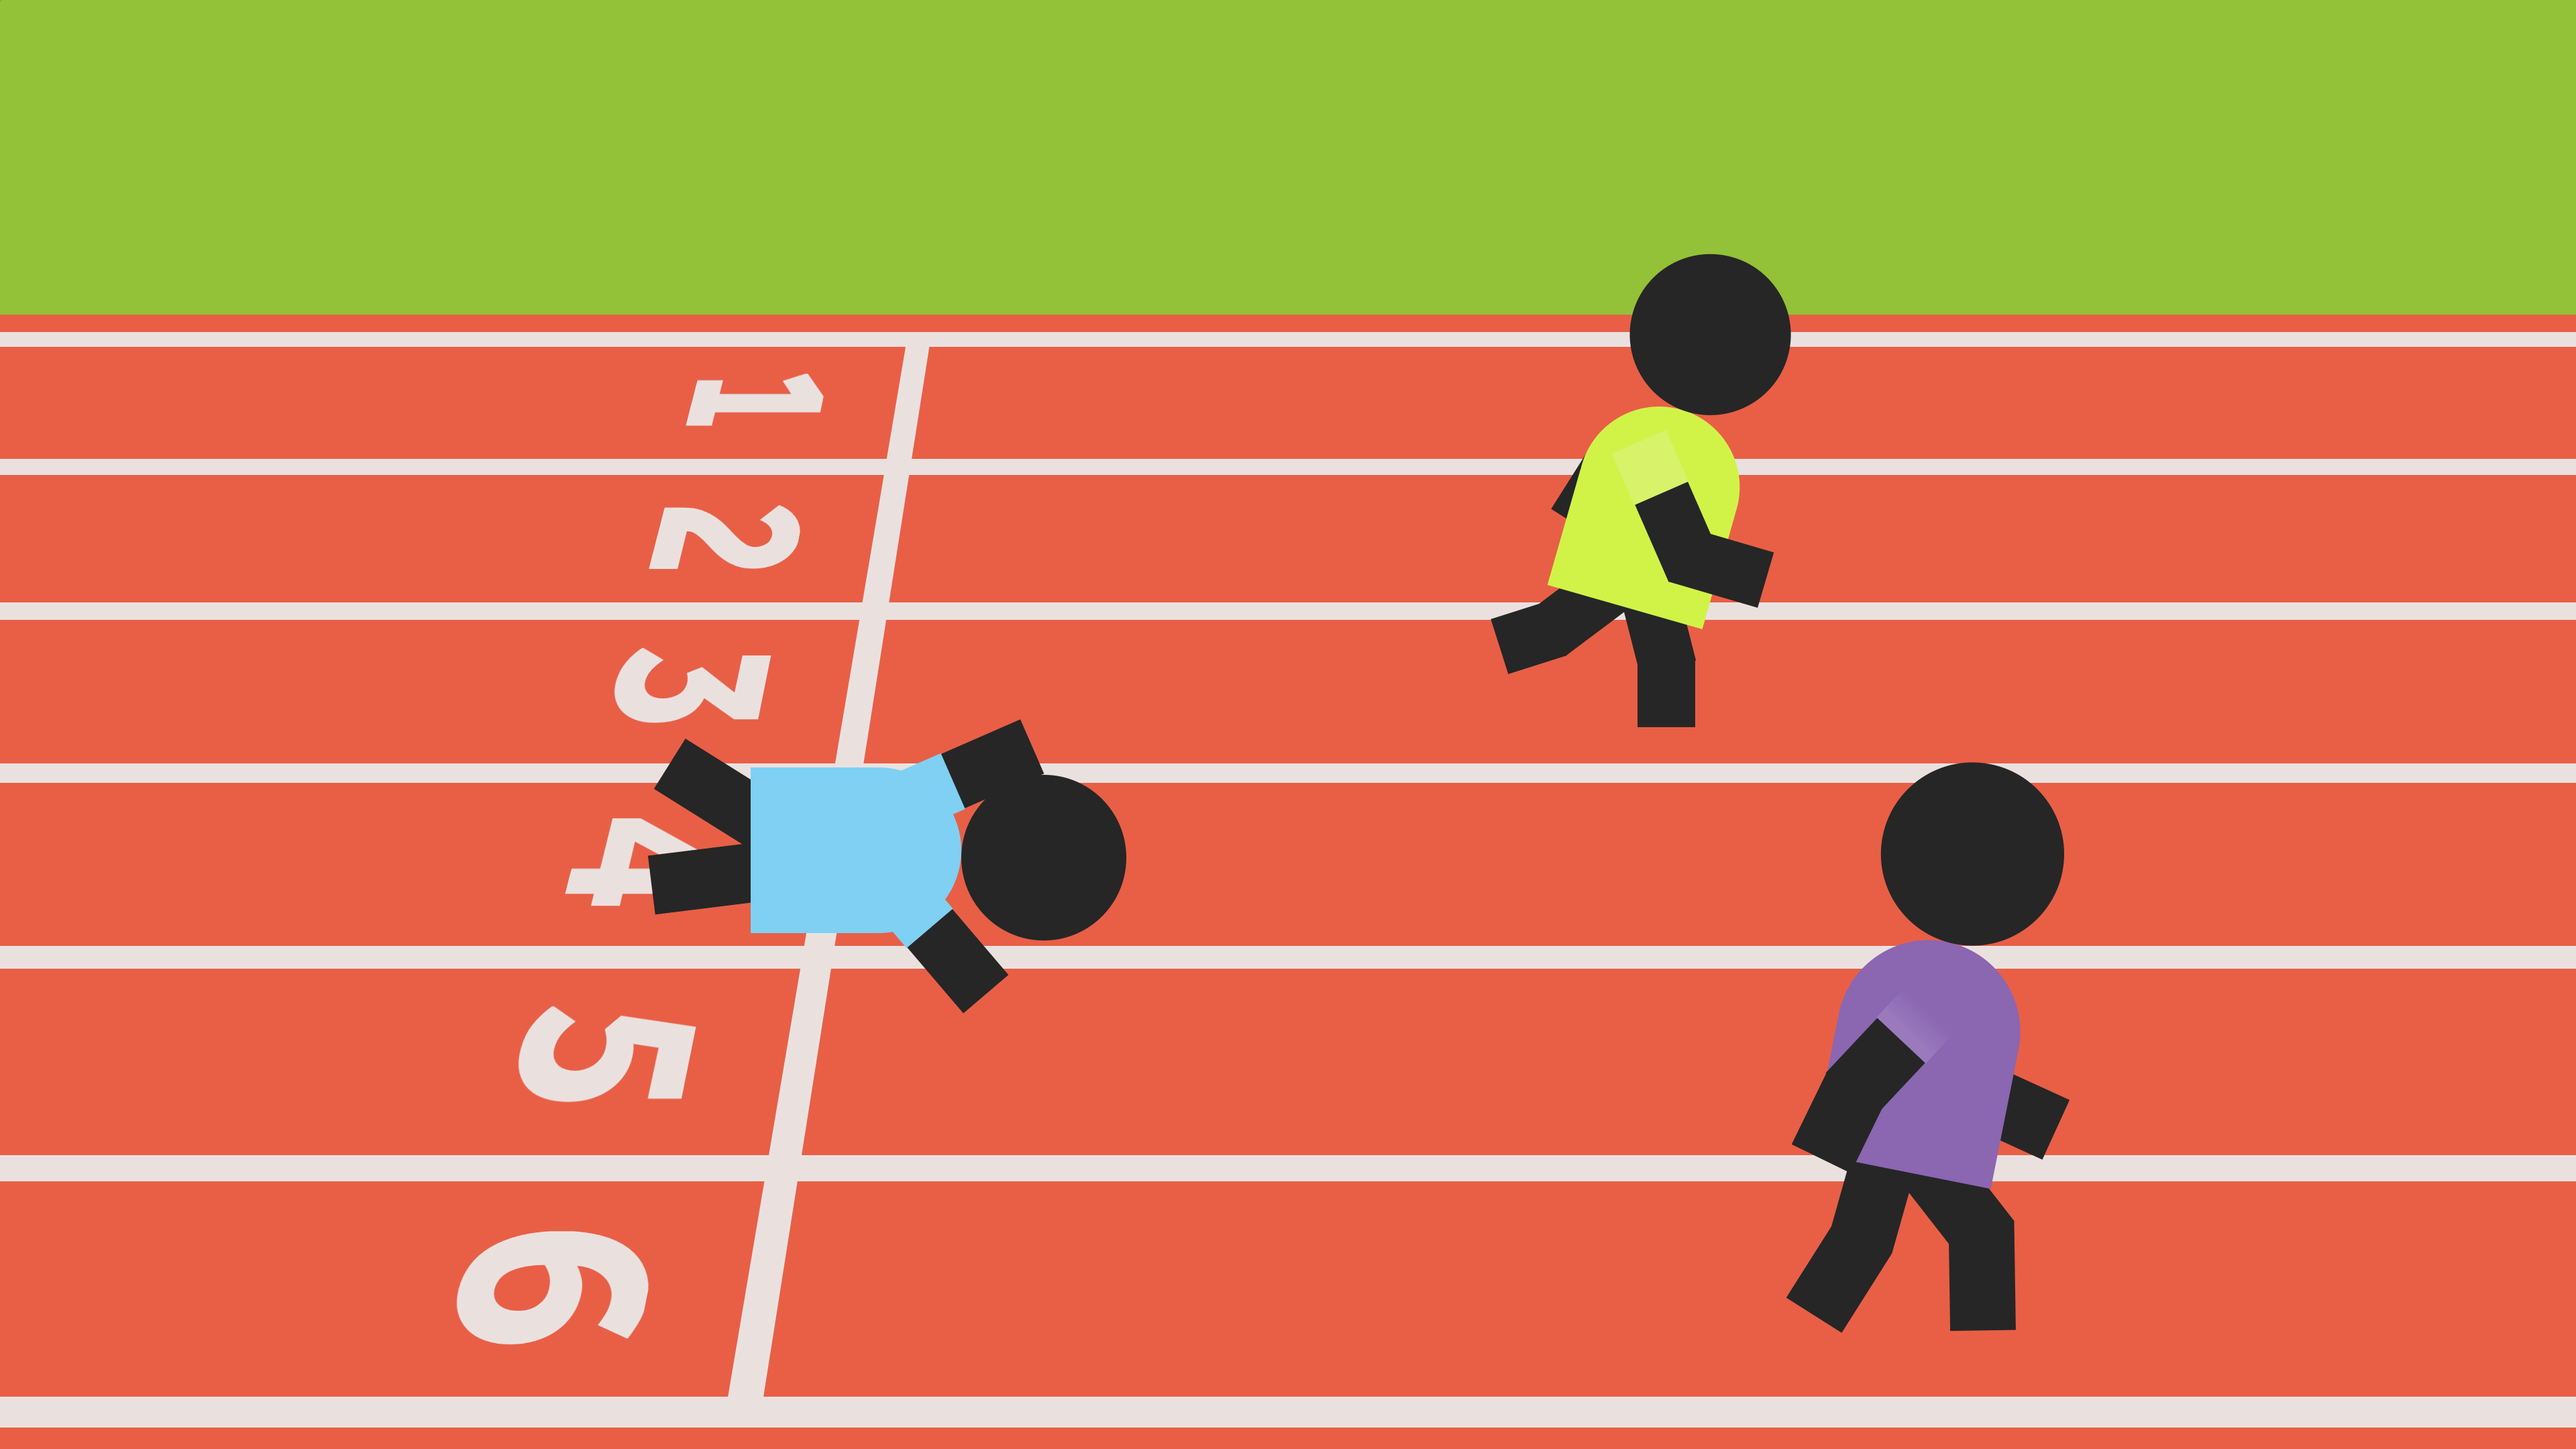 People on a running track. One person is lying on the ground.